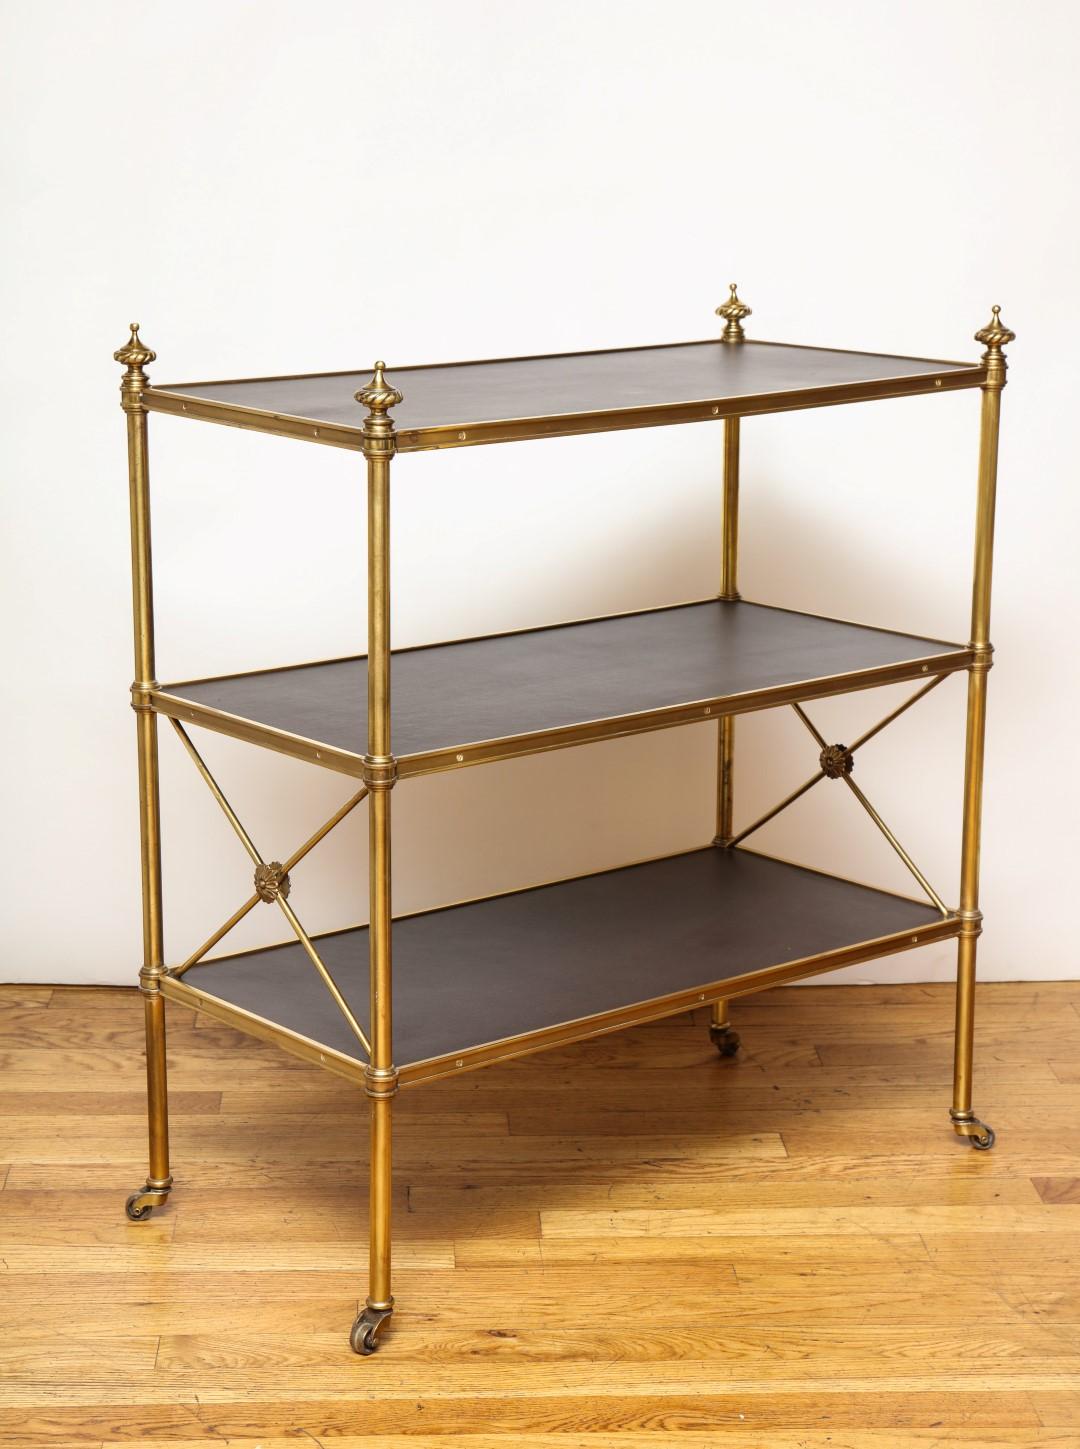 A pair of Jansen style brass etagères, the frames with rectangular leather covered wooden surfaces and x-shaped supports with centre rosettes on lower tier. The legs issuing small casters.
  